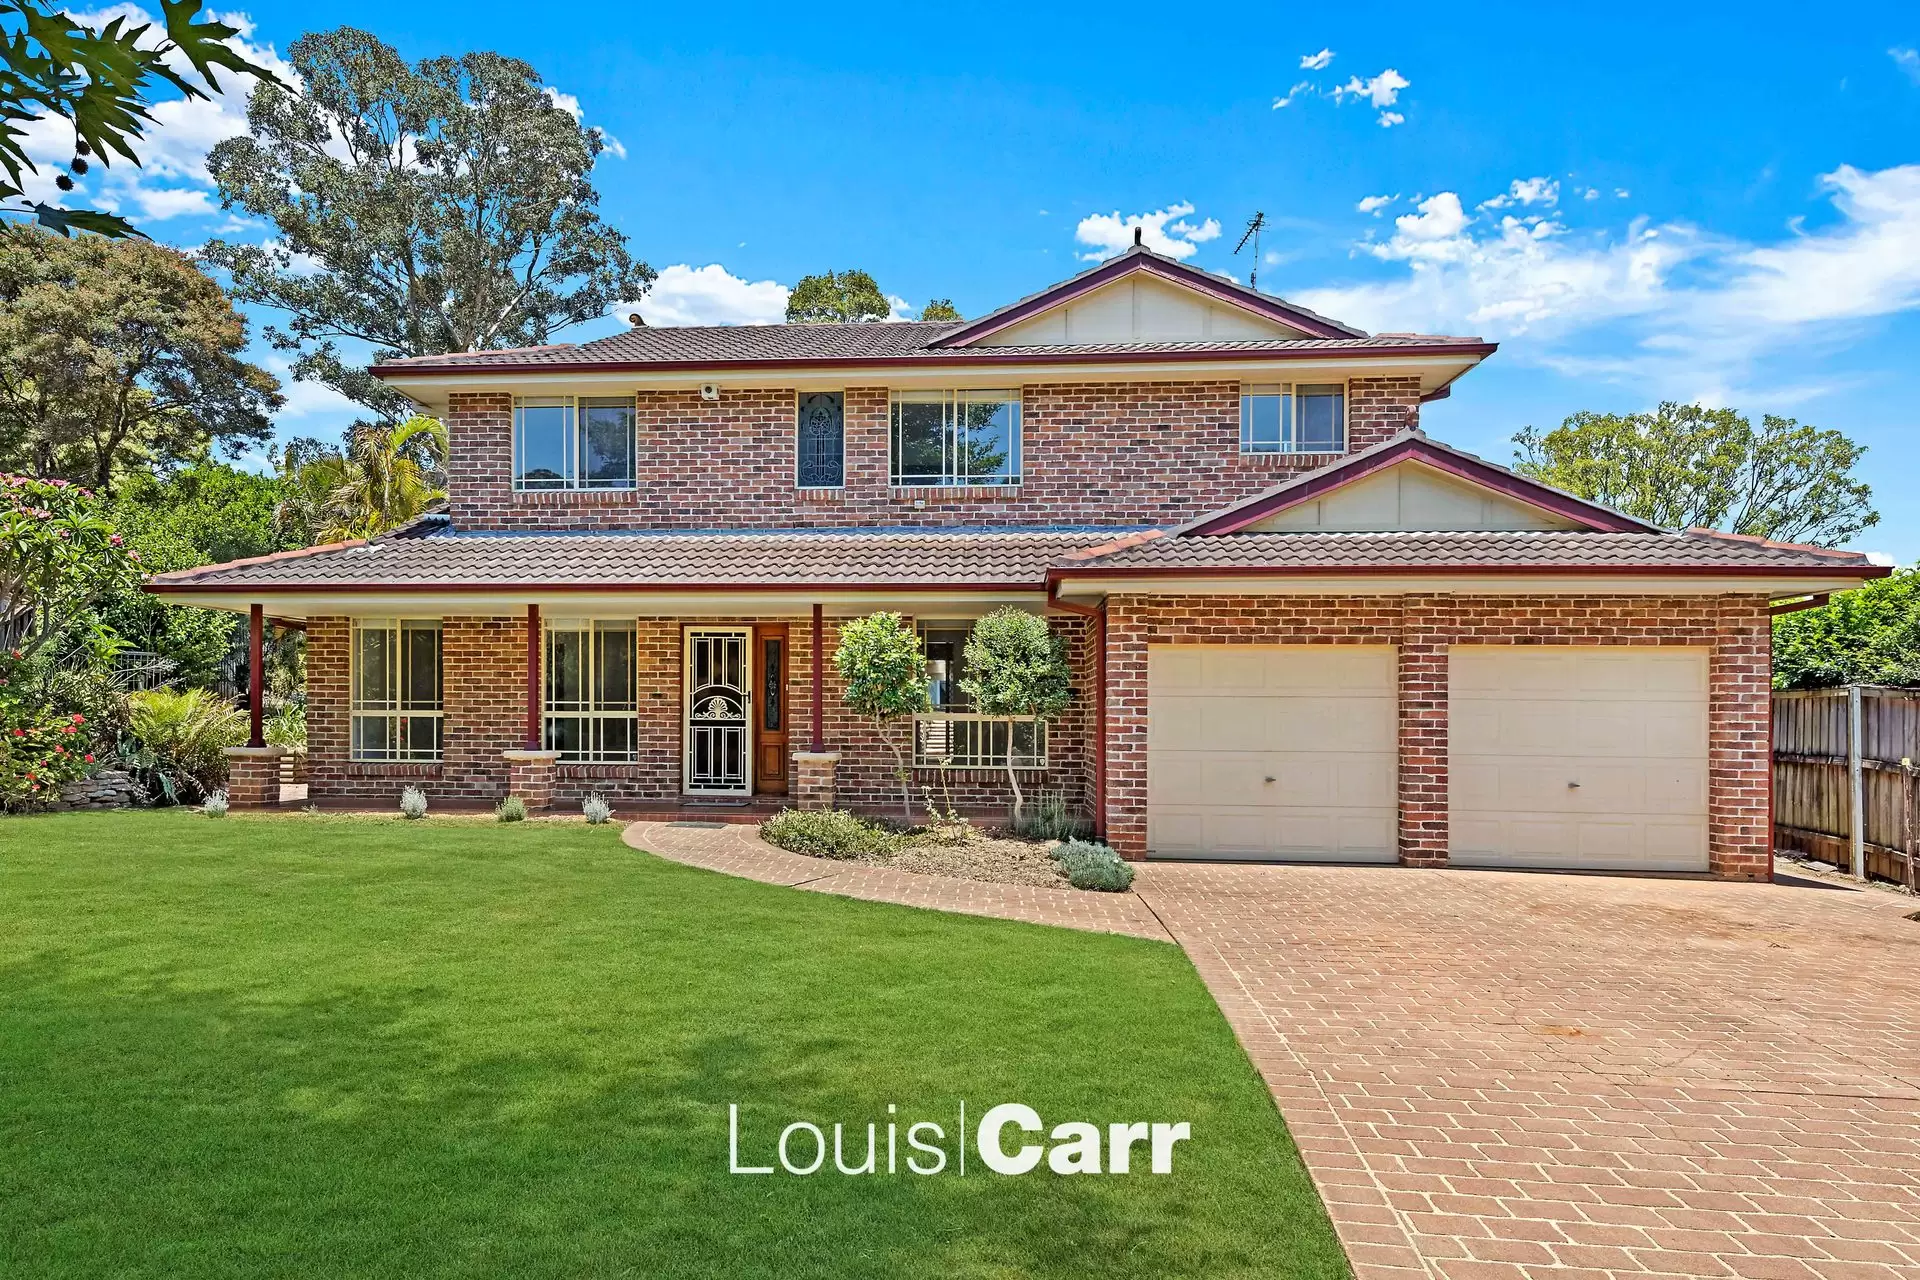 Photo #1: 4 Kingussie Avenue, Castle Hill - Sold by Louis Carr Real Estate